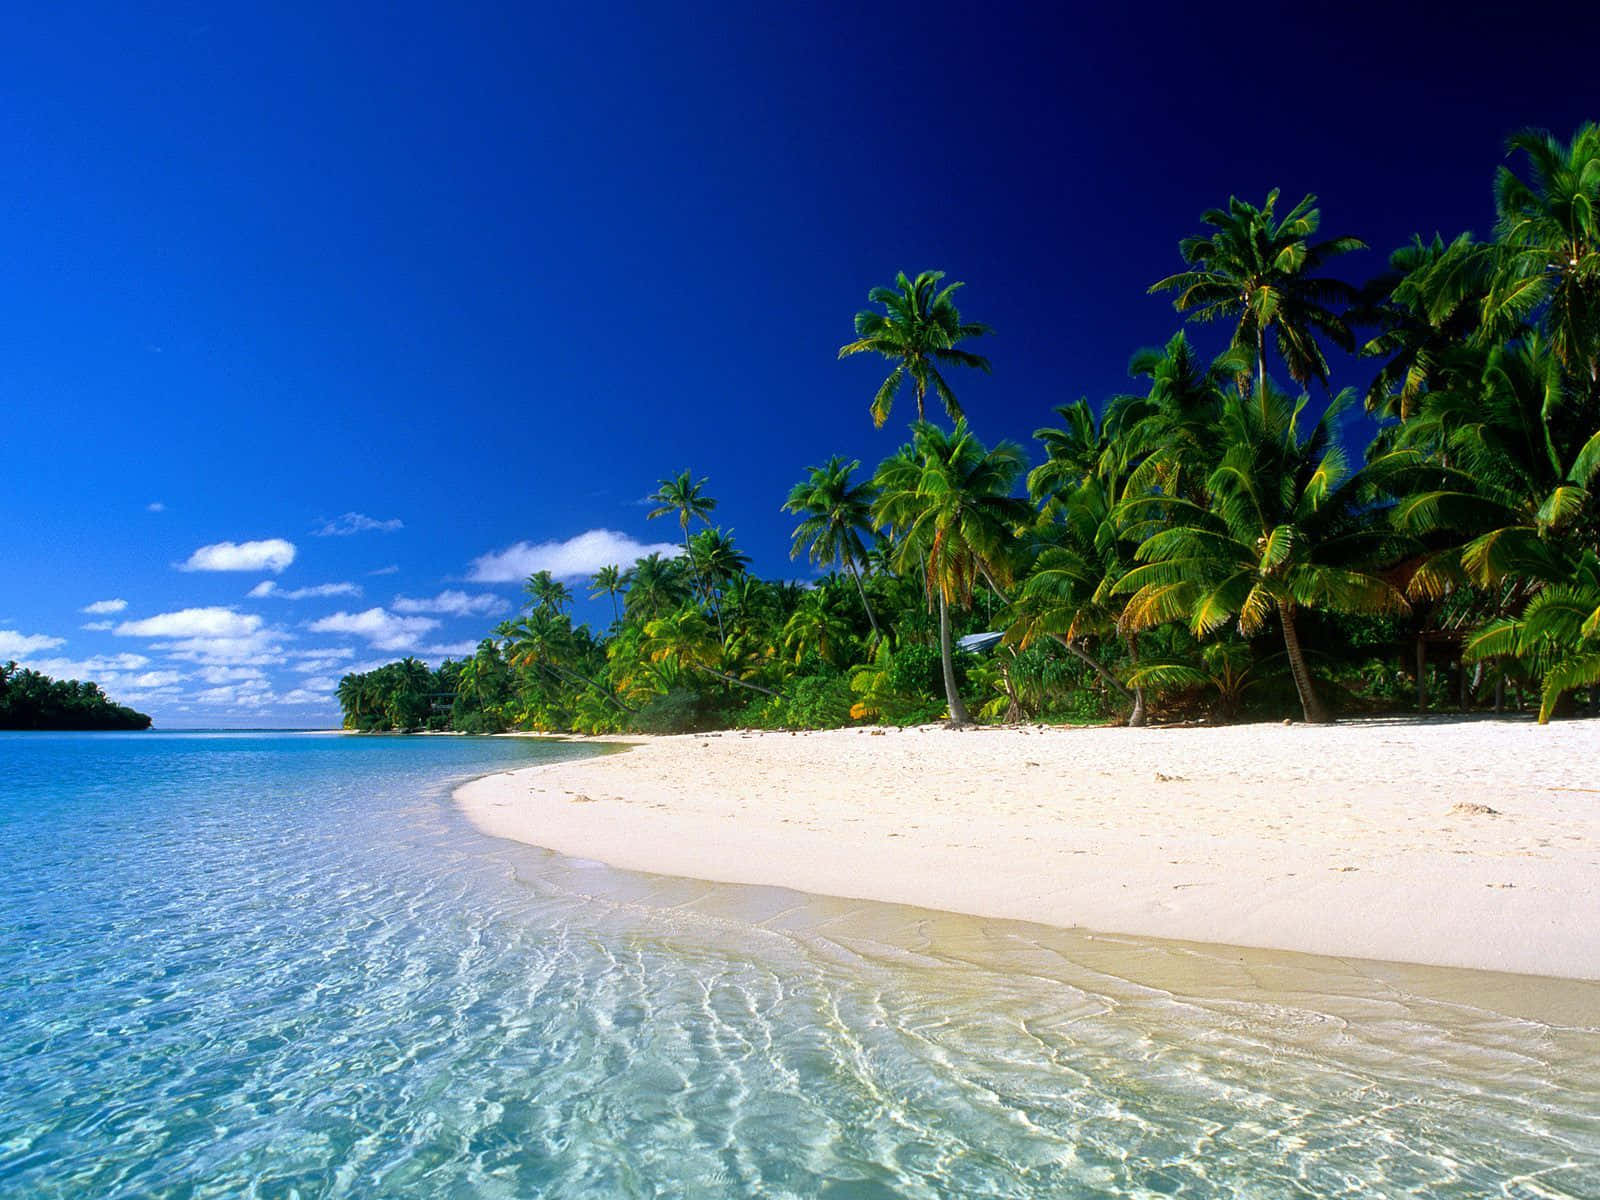 A Beach With Palm Trees And Clear Water